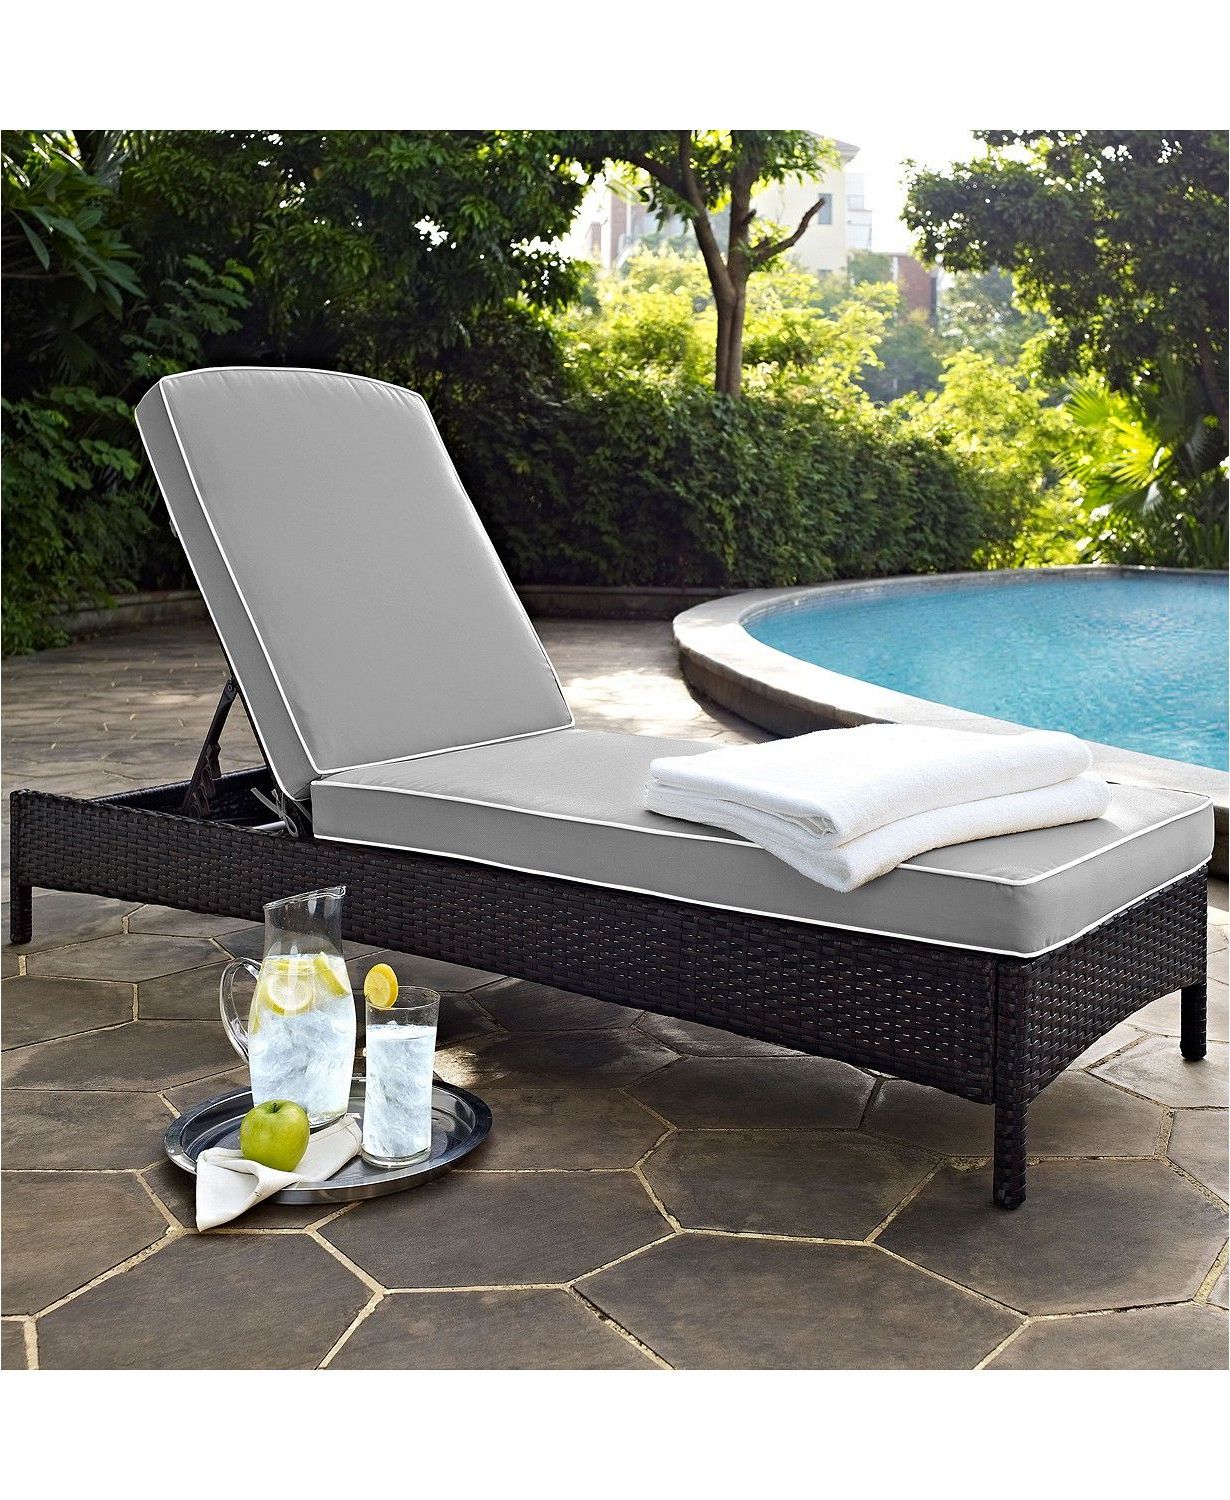 Current Palm Harbor Outdoor Wicker Chaise Lounge With Cushions Regarding Jamaica Outdoor Wicker Chaise Lounges (View 13 of 25)